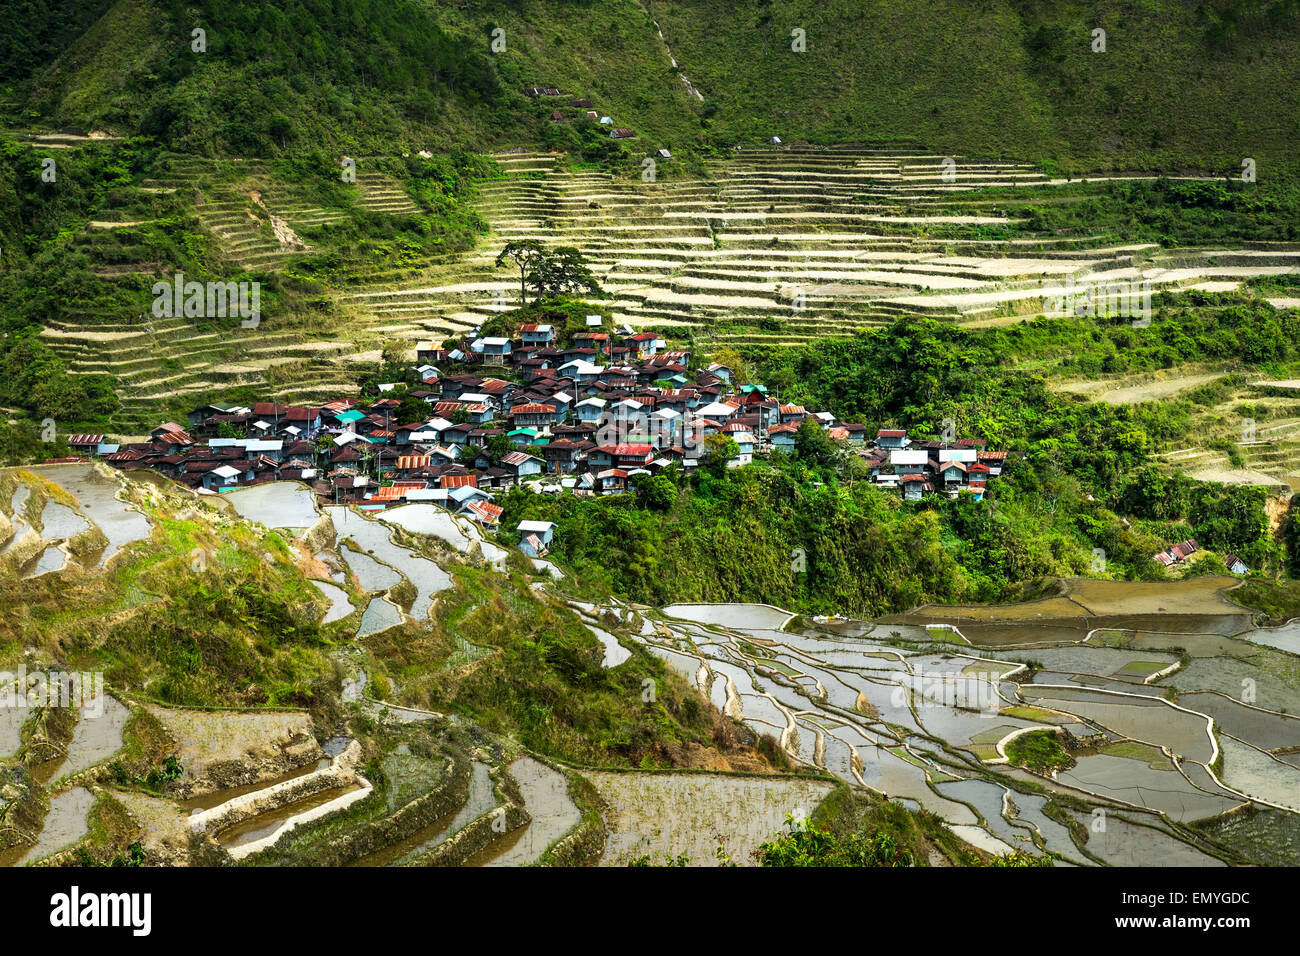 Amazing panorama view of rice terraces fields and village houses in Ifugao province mountains. Banaue, Philippines UNESCO herita Stock Photo